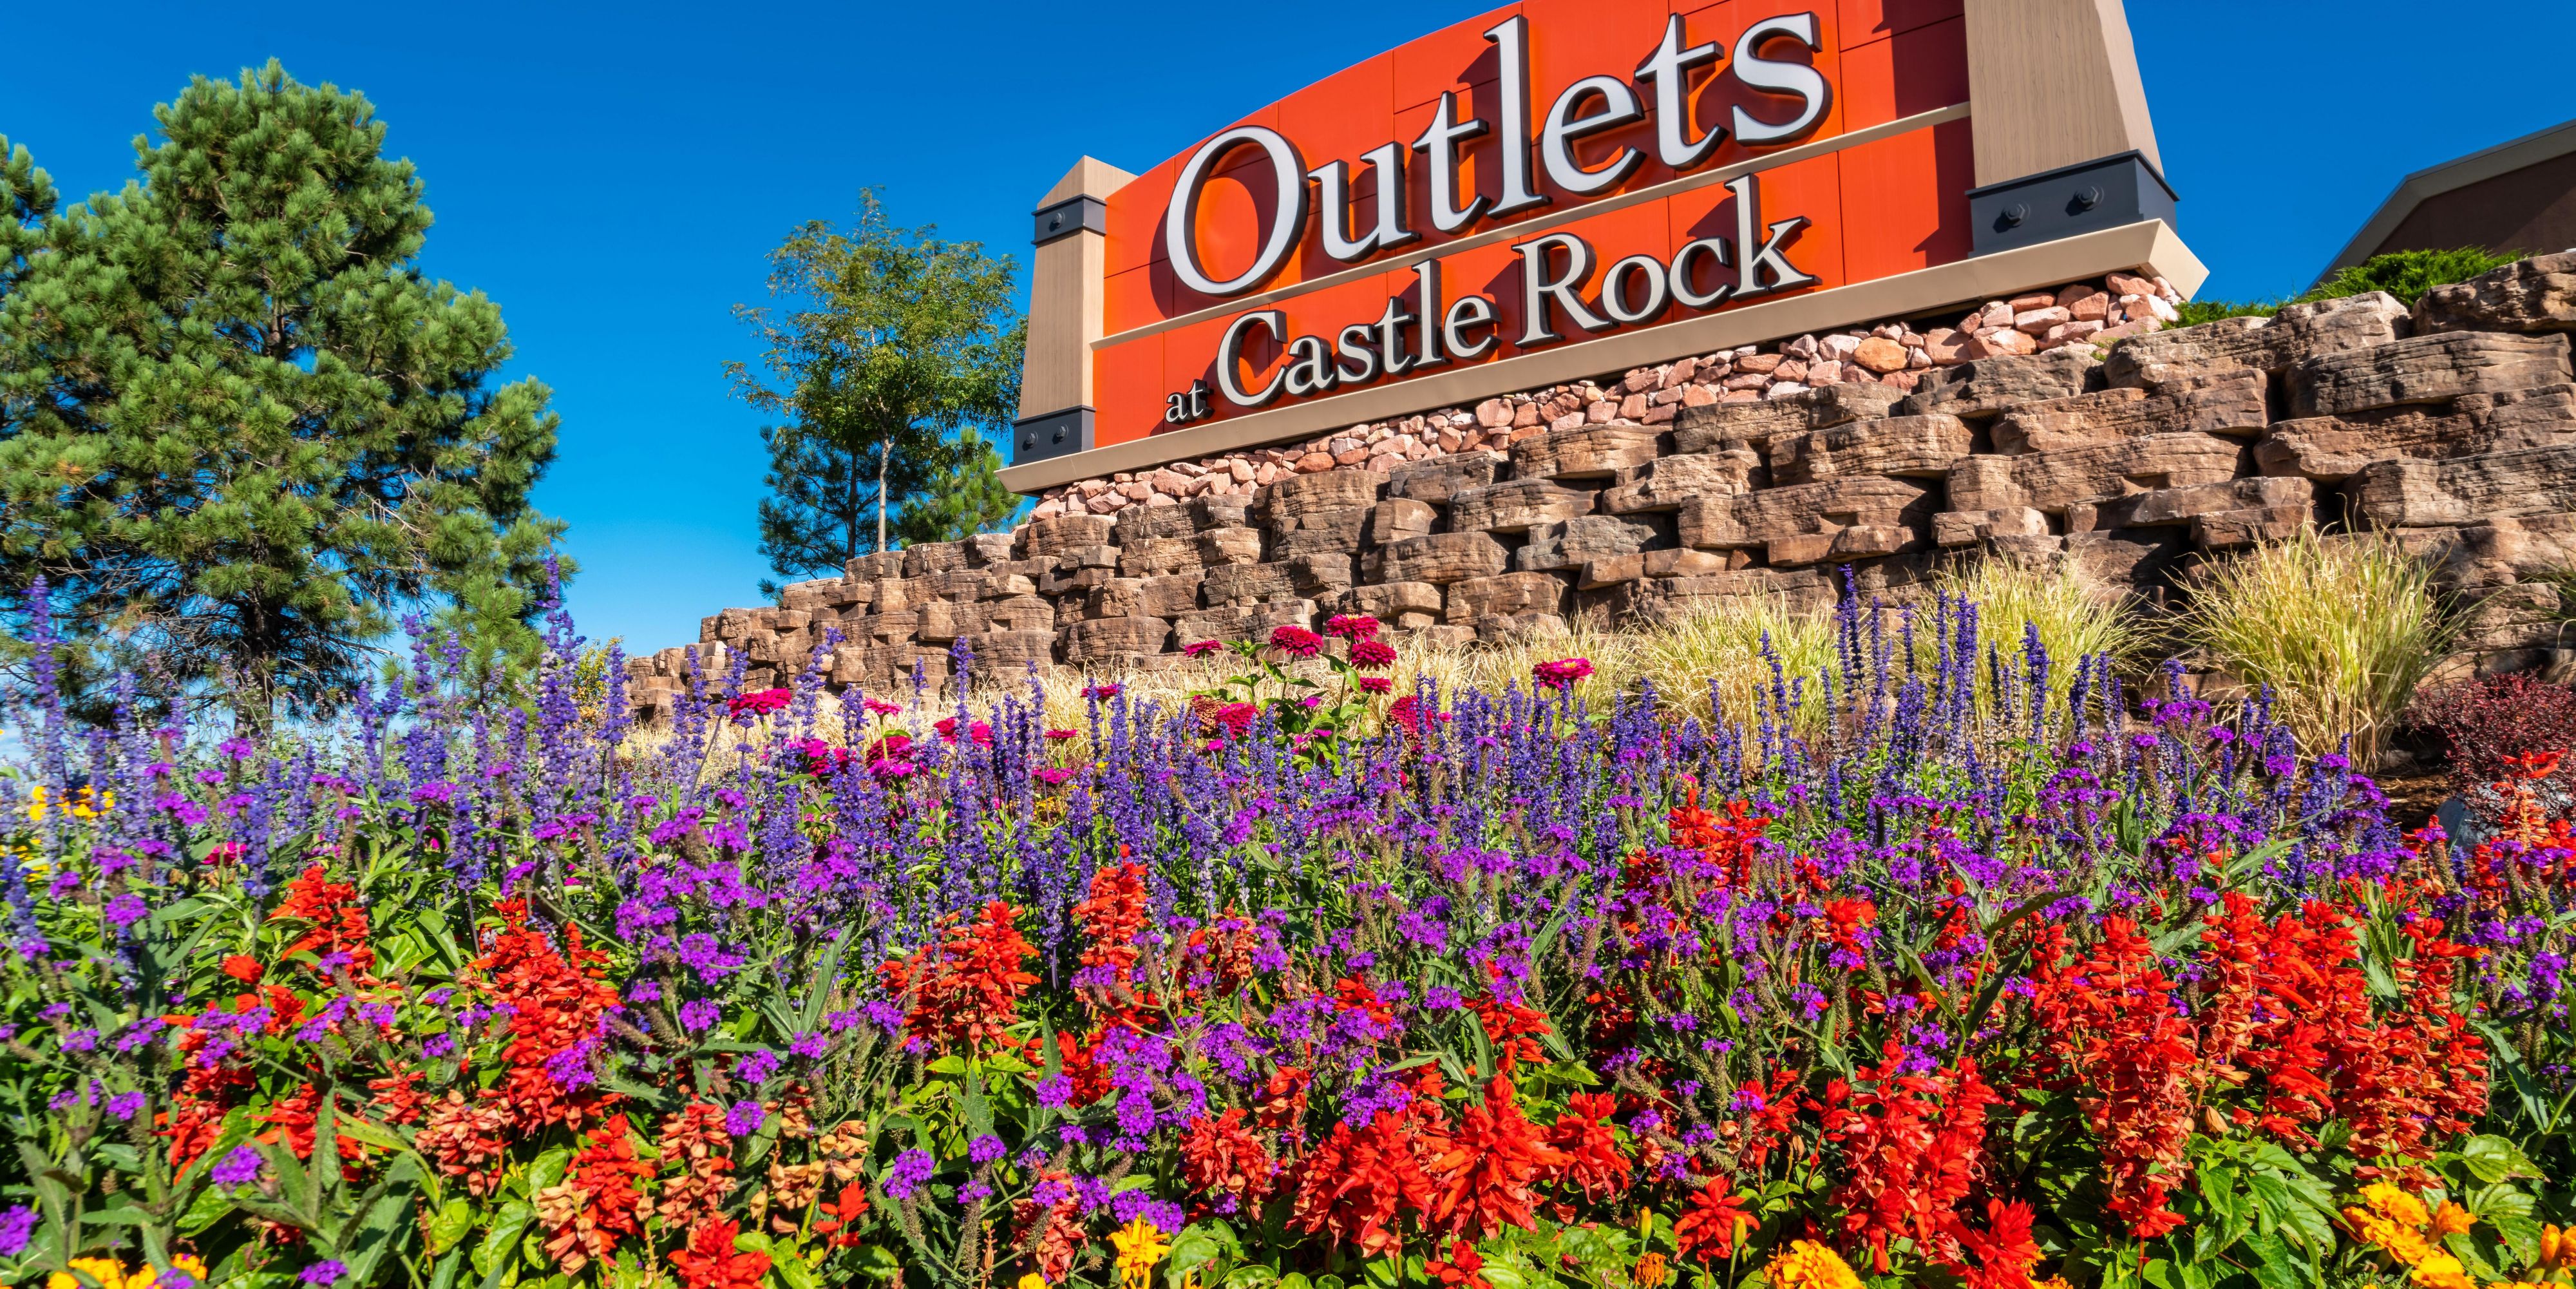 The Outlets at Castle Rock have over 100 of the Worlds best brands all at up to 70% off. The Outlets at Castle Rock have been voted Colorado's BEST Outlet Shopping since 2015!